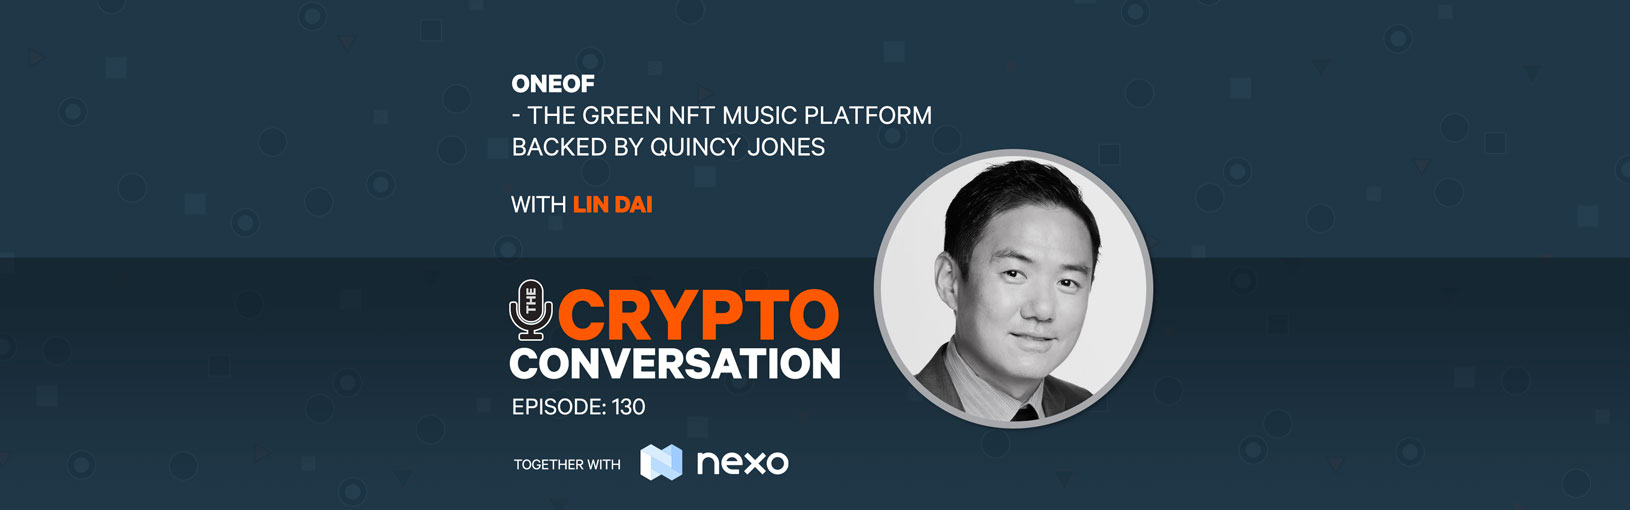 OneOf – The green NFT music platform backed by Quincy Jones